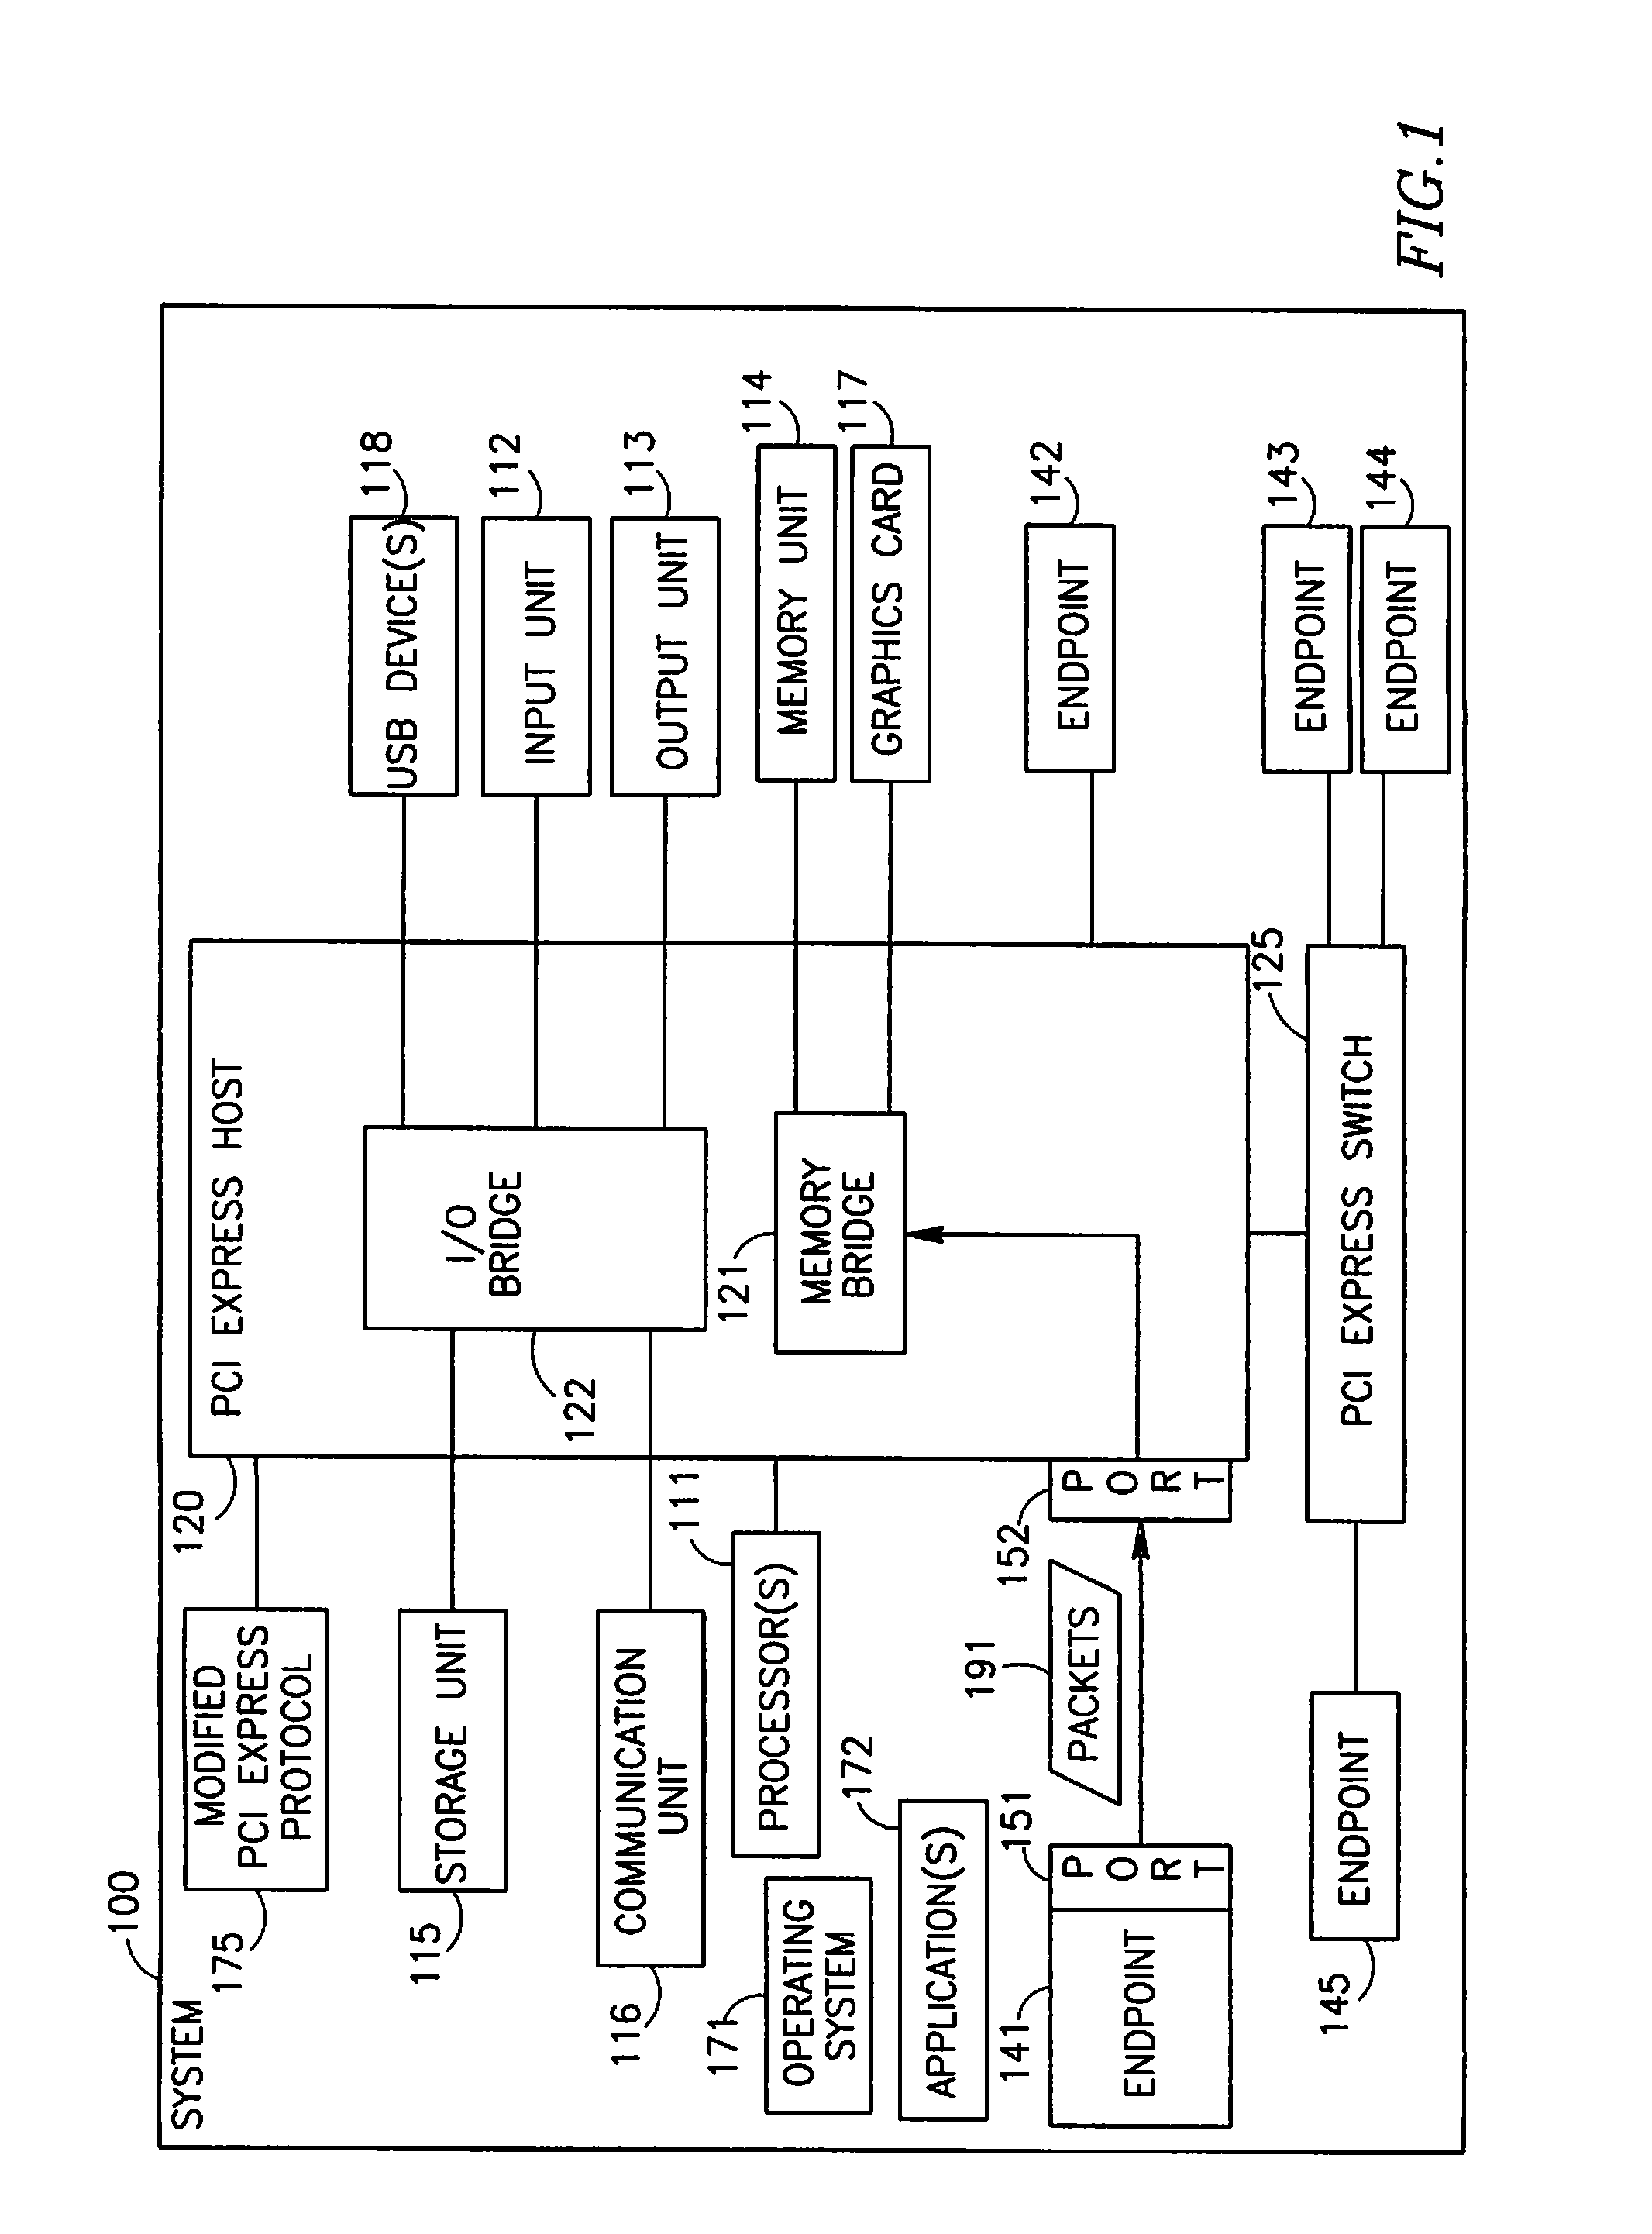 Device, System and Method of Modification of PCI Express Packet Digest